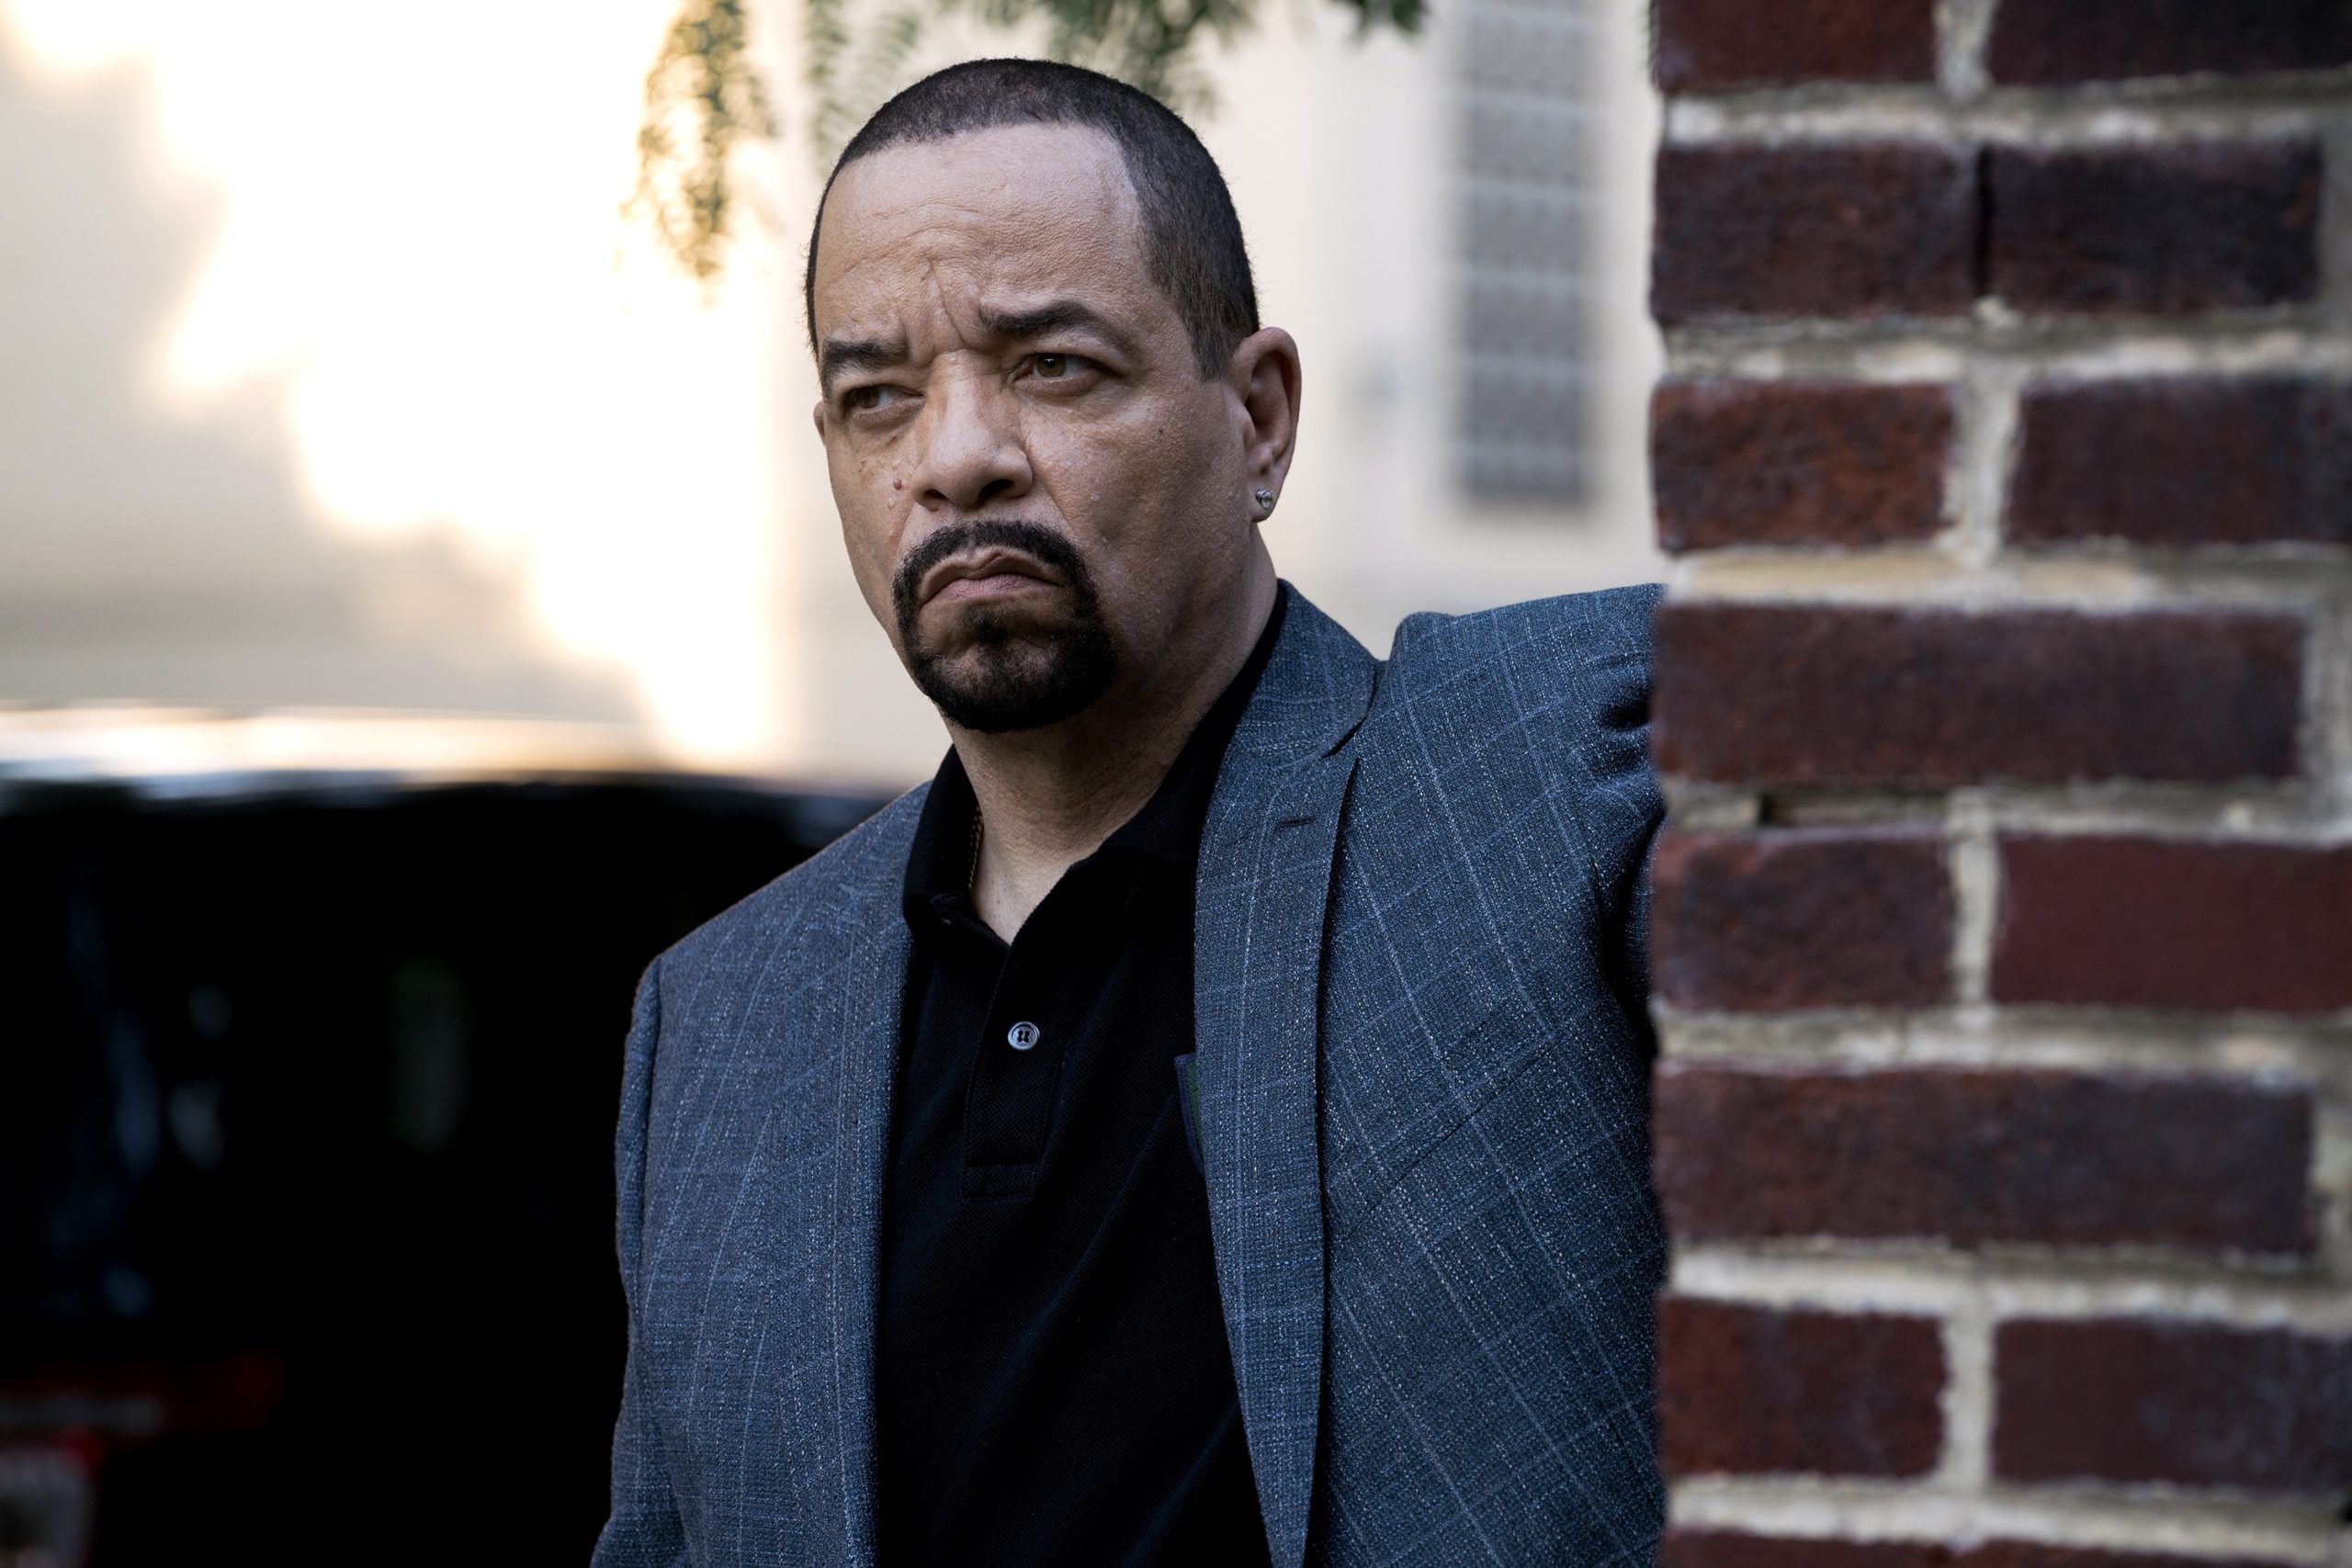 Earlier today Ice-T showed up a little late to the set of “Law & Or...